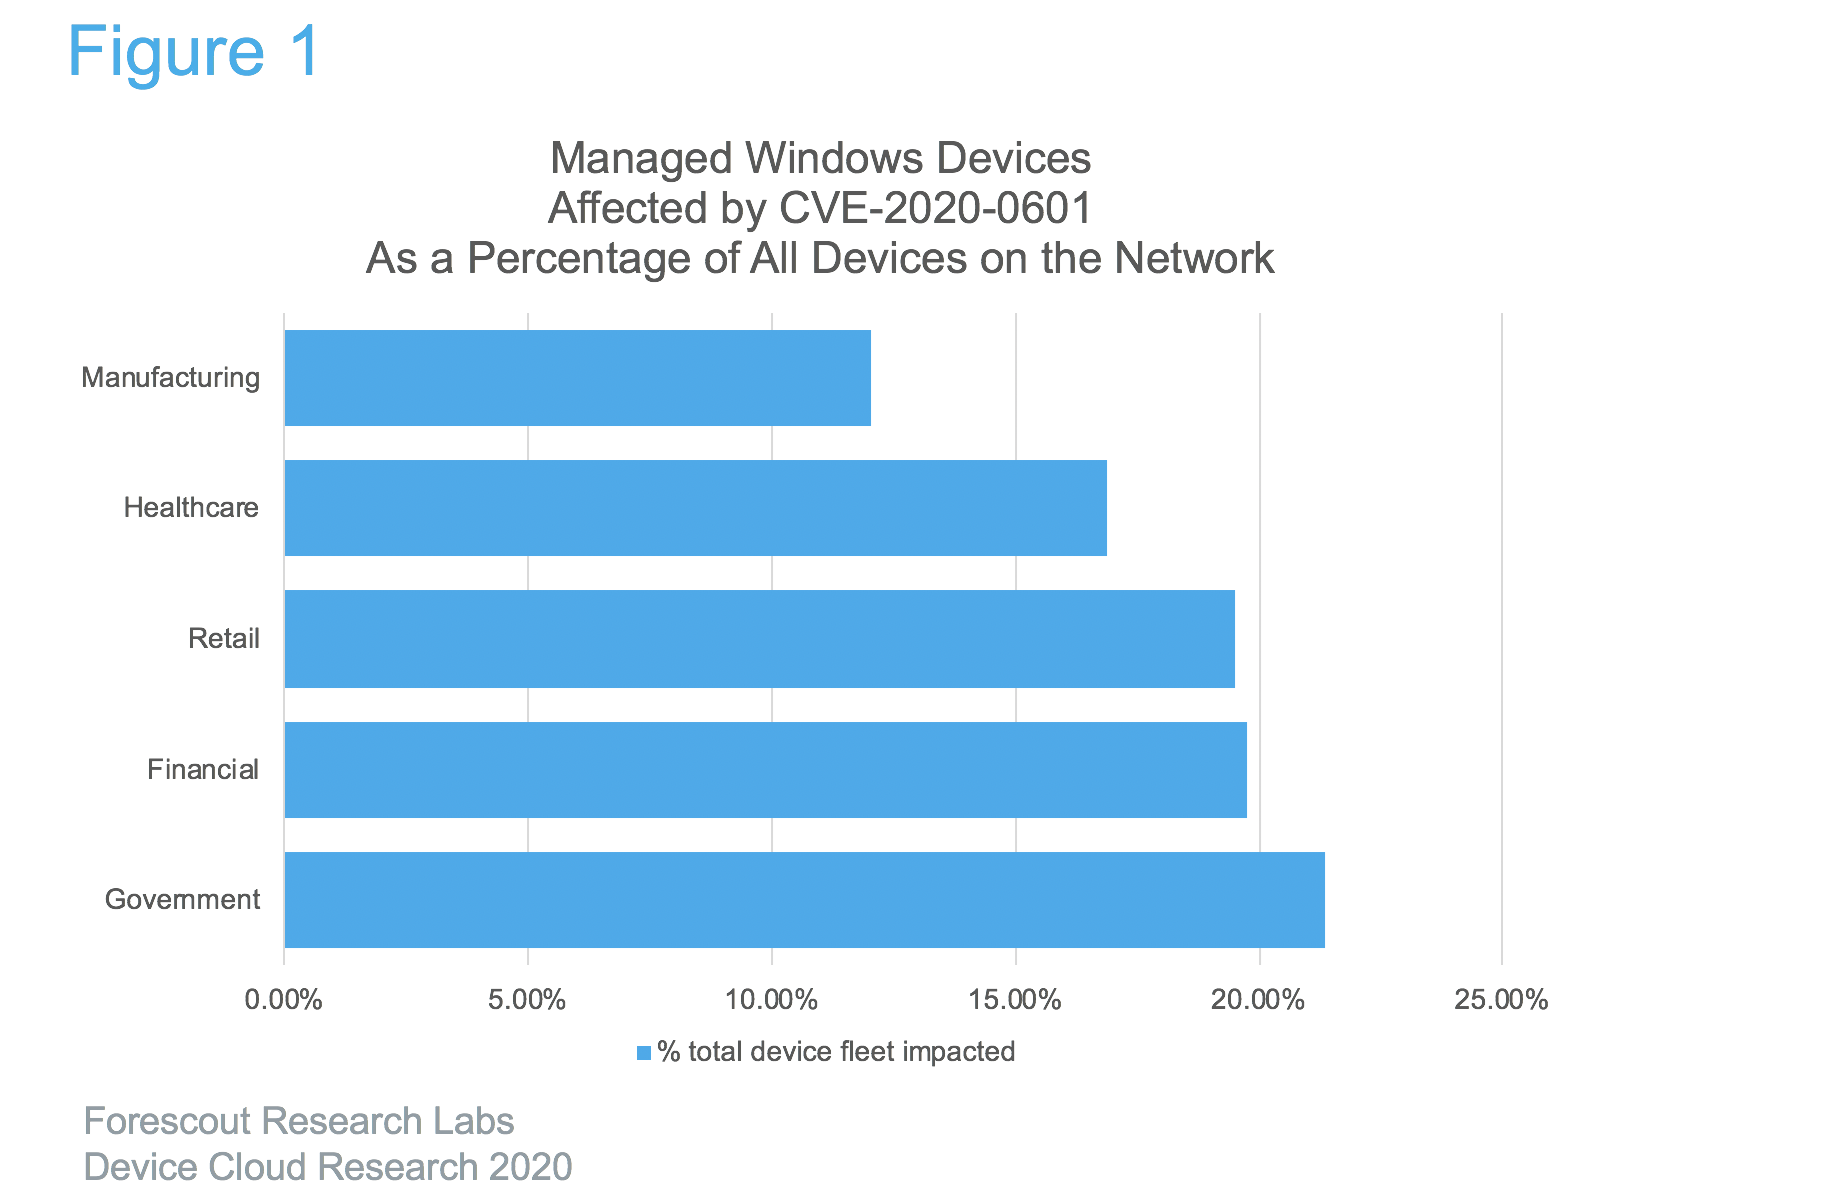 Managed Windows Devices Affected by CVE-2020-0601 As a Percentage of All Devices on the Network